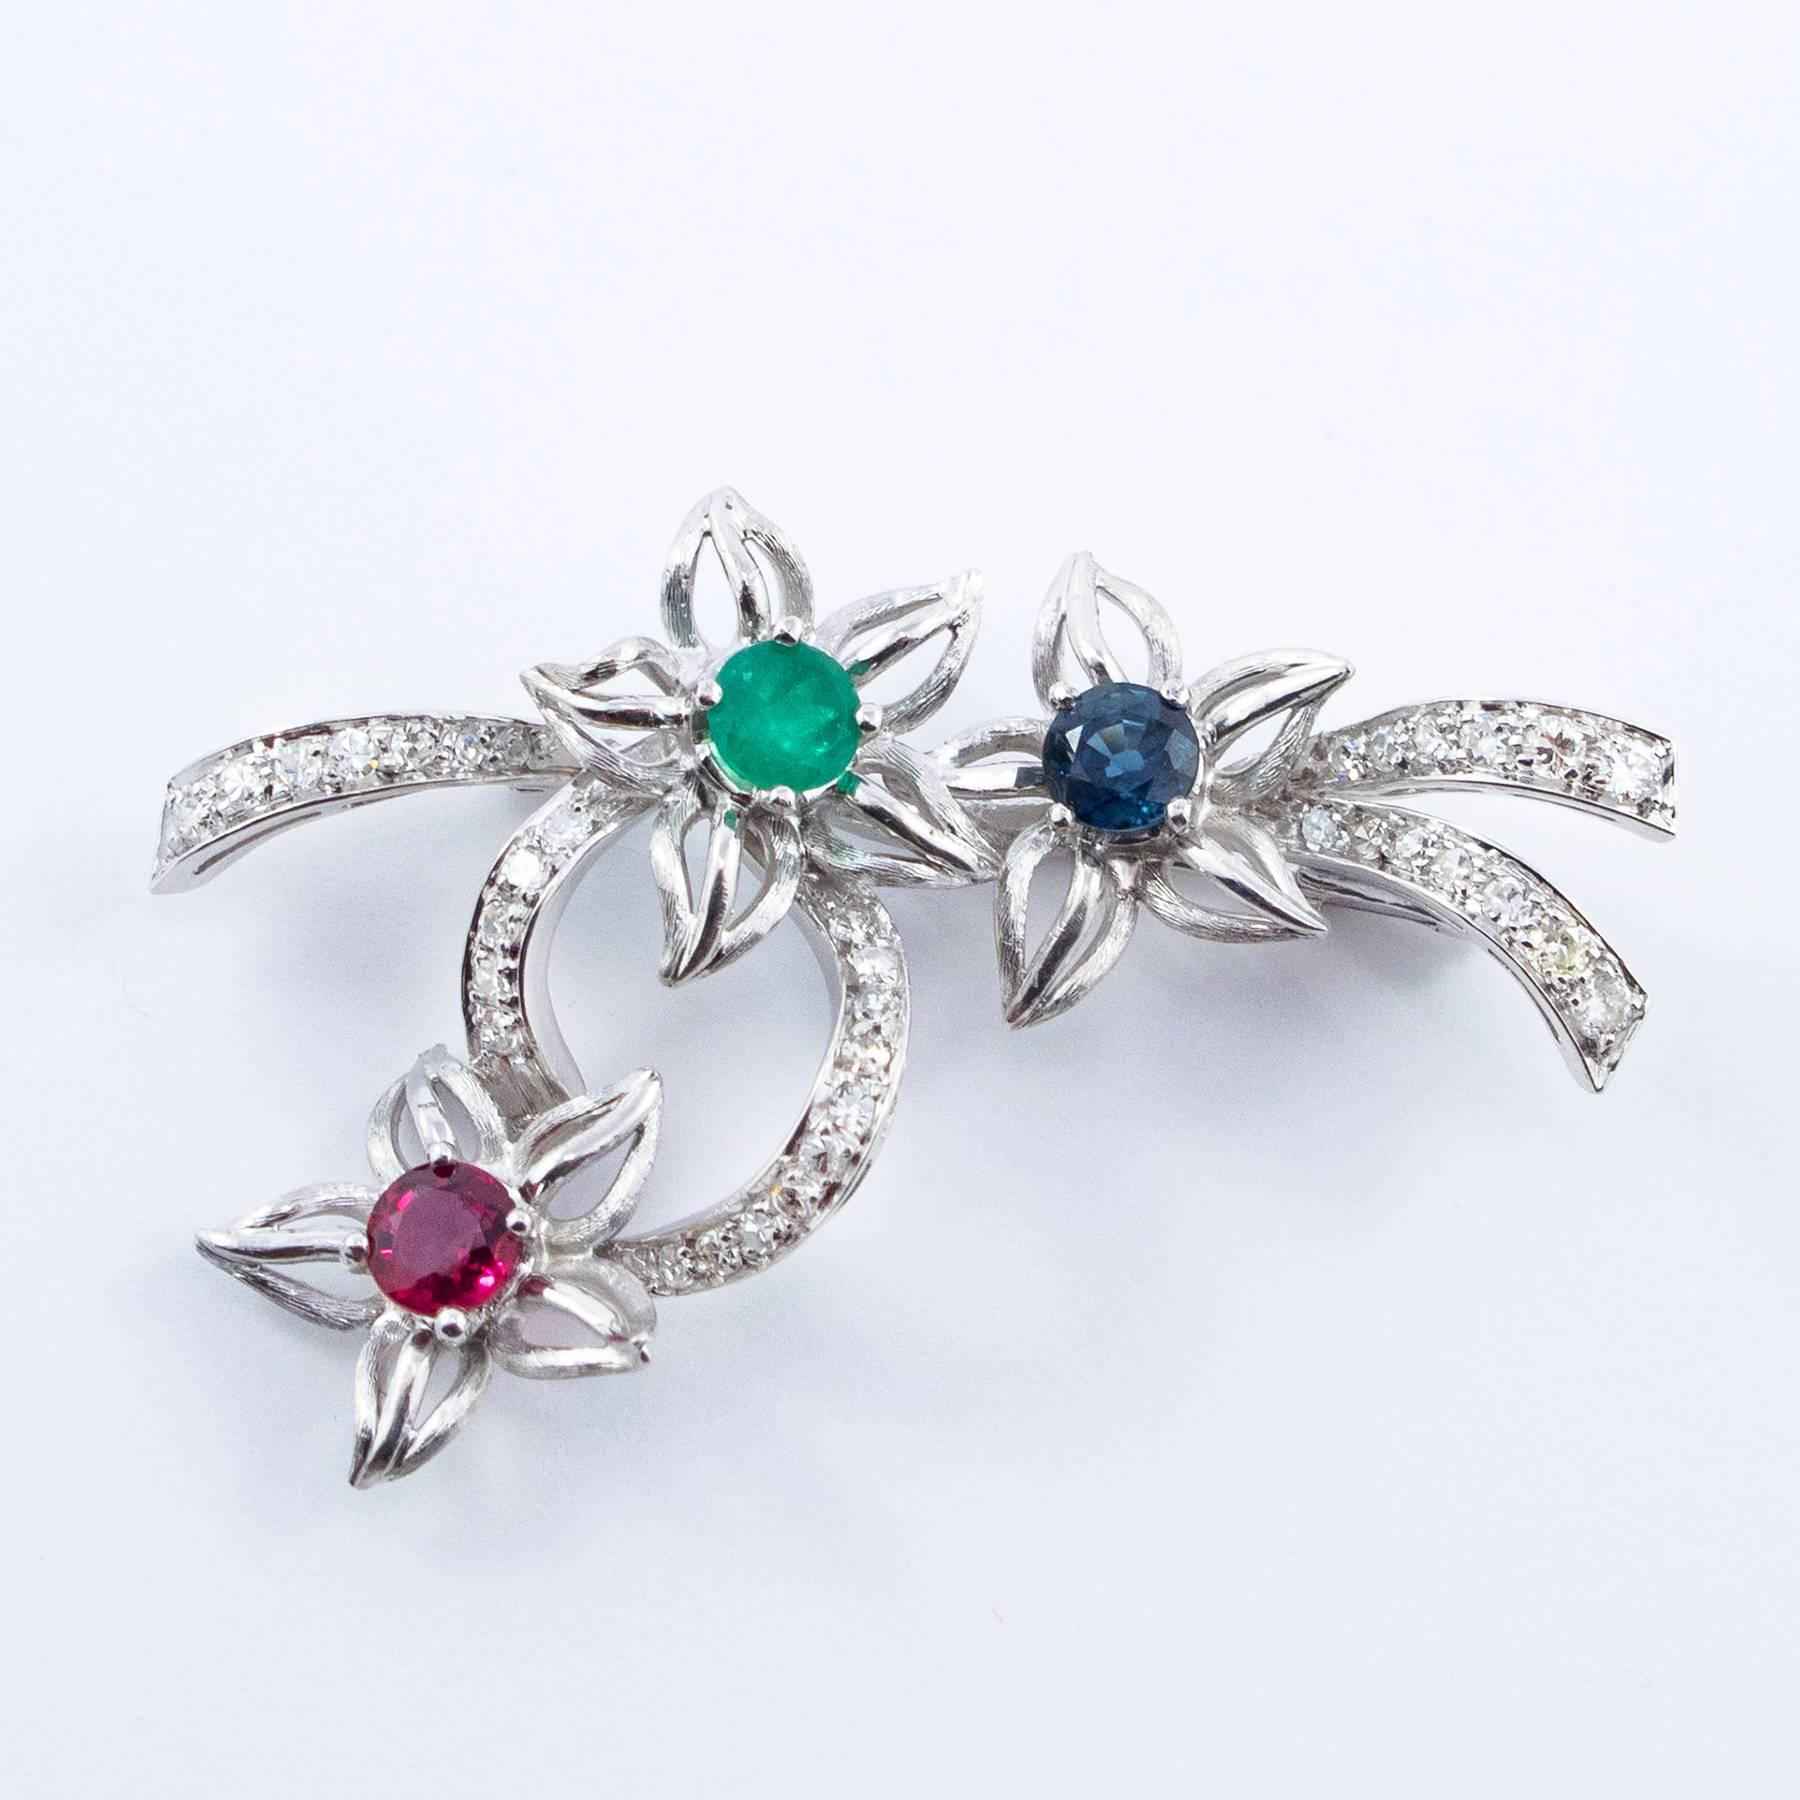 A beautiful Diamond set Platinum brooch dates to about 1940 and consists of a ribbon of Diamonds with a spray of 3 open flowers, set with round, faceted precious gemstone throat of about .50 carat each including one Emerald, one Blue Sapphire and